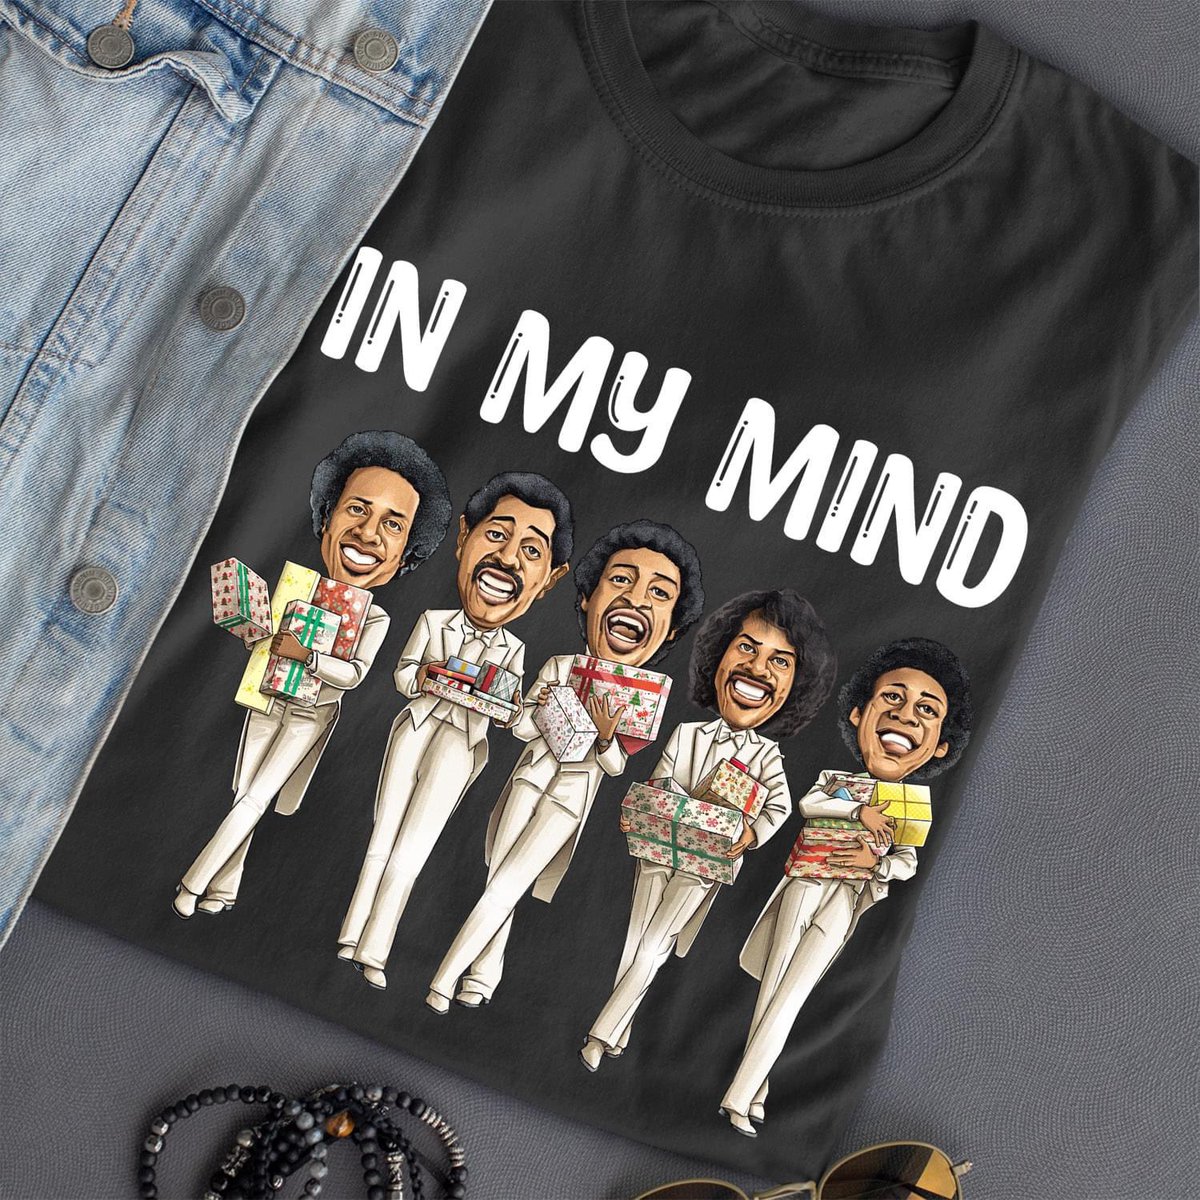 This is one of the Blackest Christmas T-Shirts ever